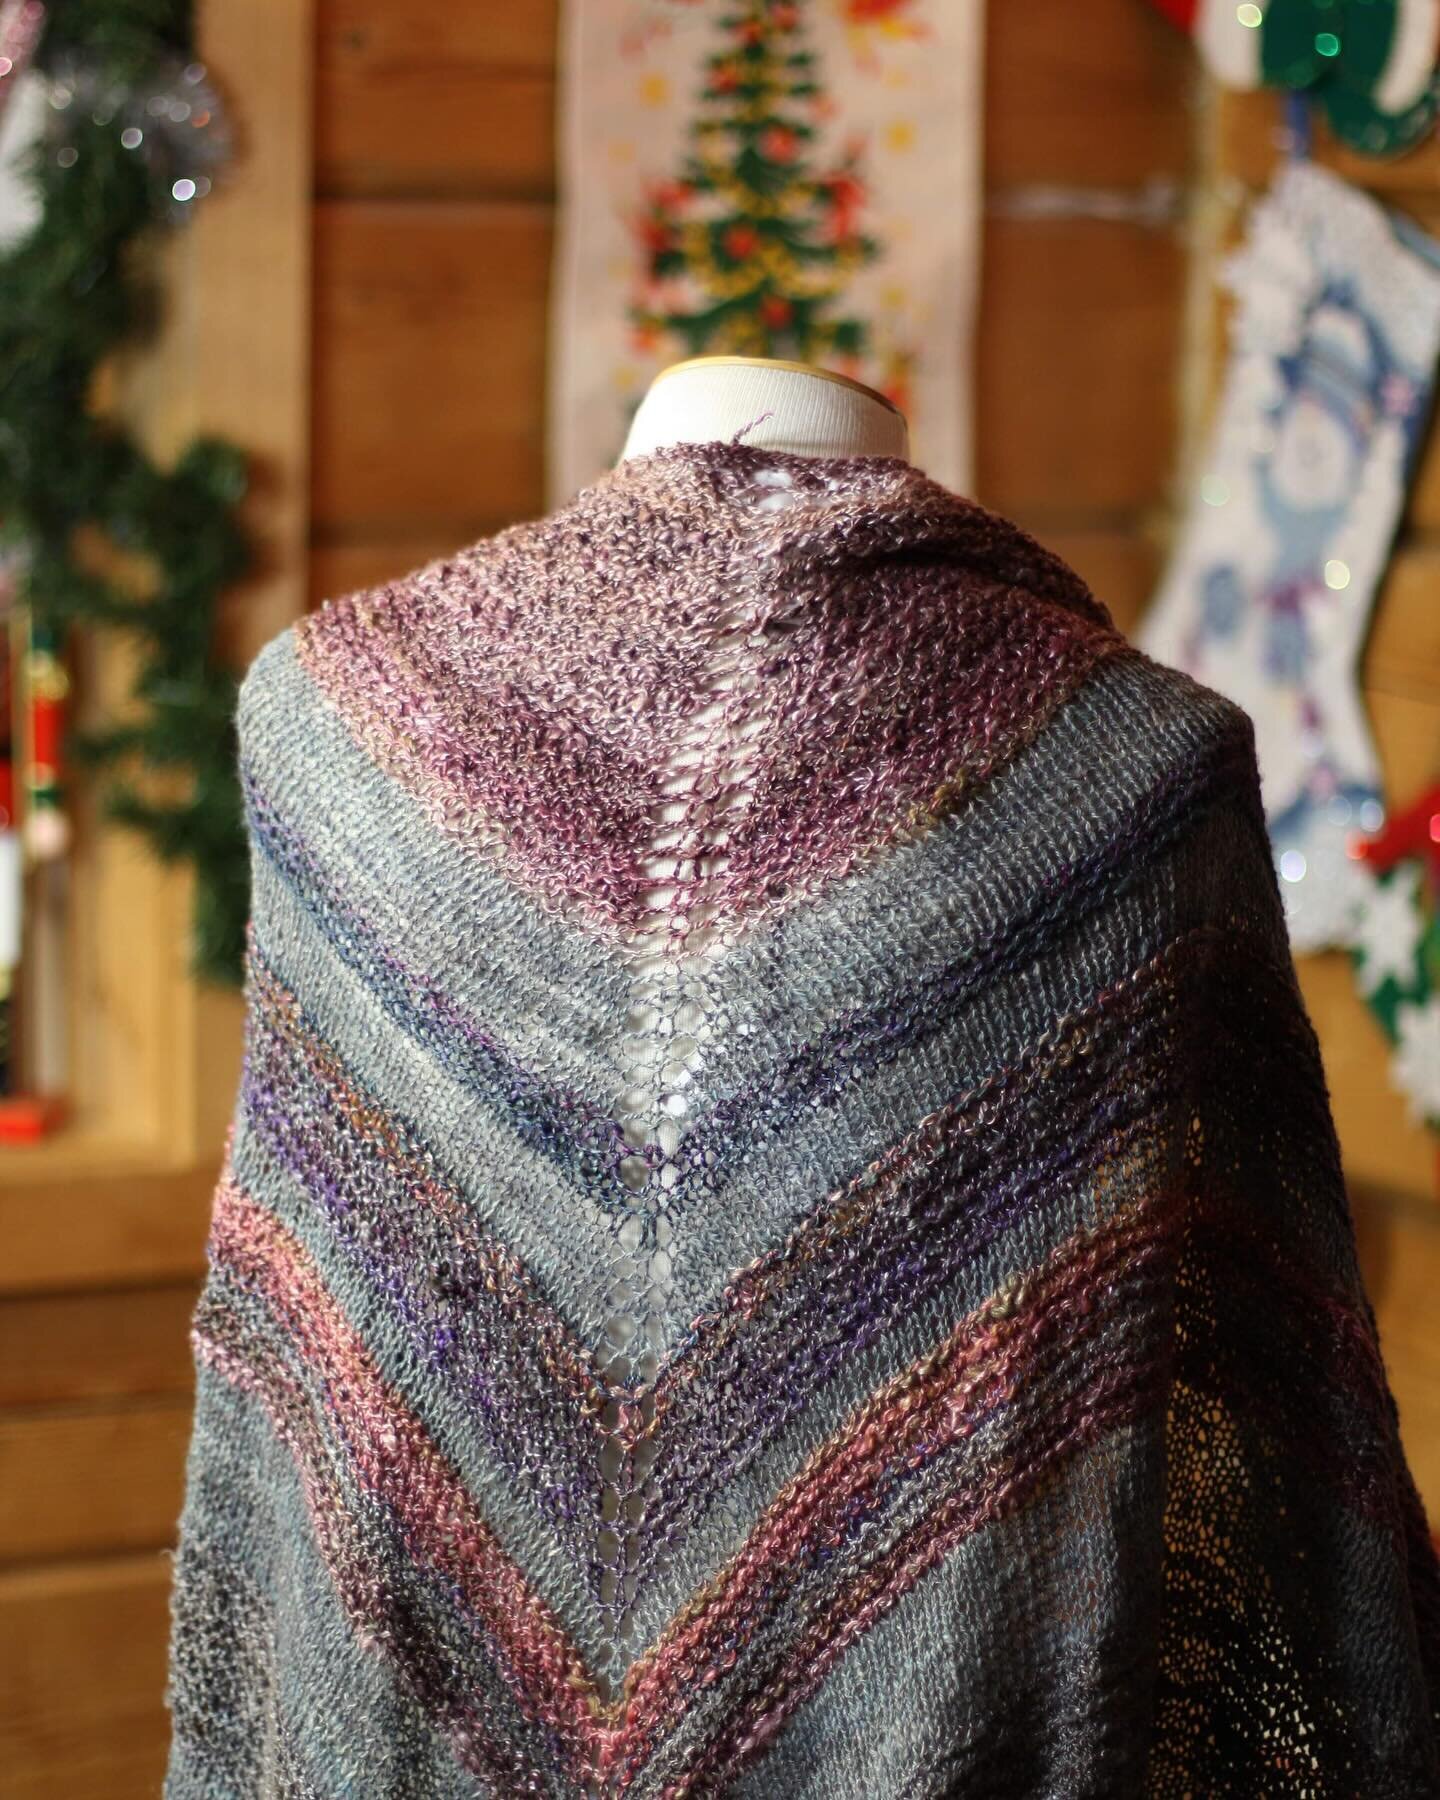 Said goodbye to this shawl in 2023. It spent a few years lingering on my needles, and longer on the wheel before that - it&rsquo;s all handspun!- and a dad and daughters brought it home to give to mom for Christmas. 
A little bittersweet but so heart